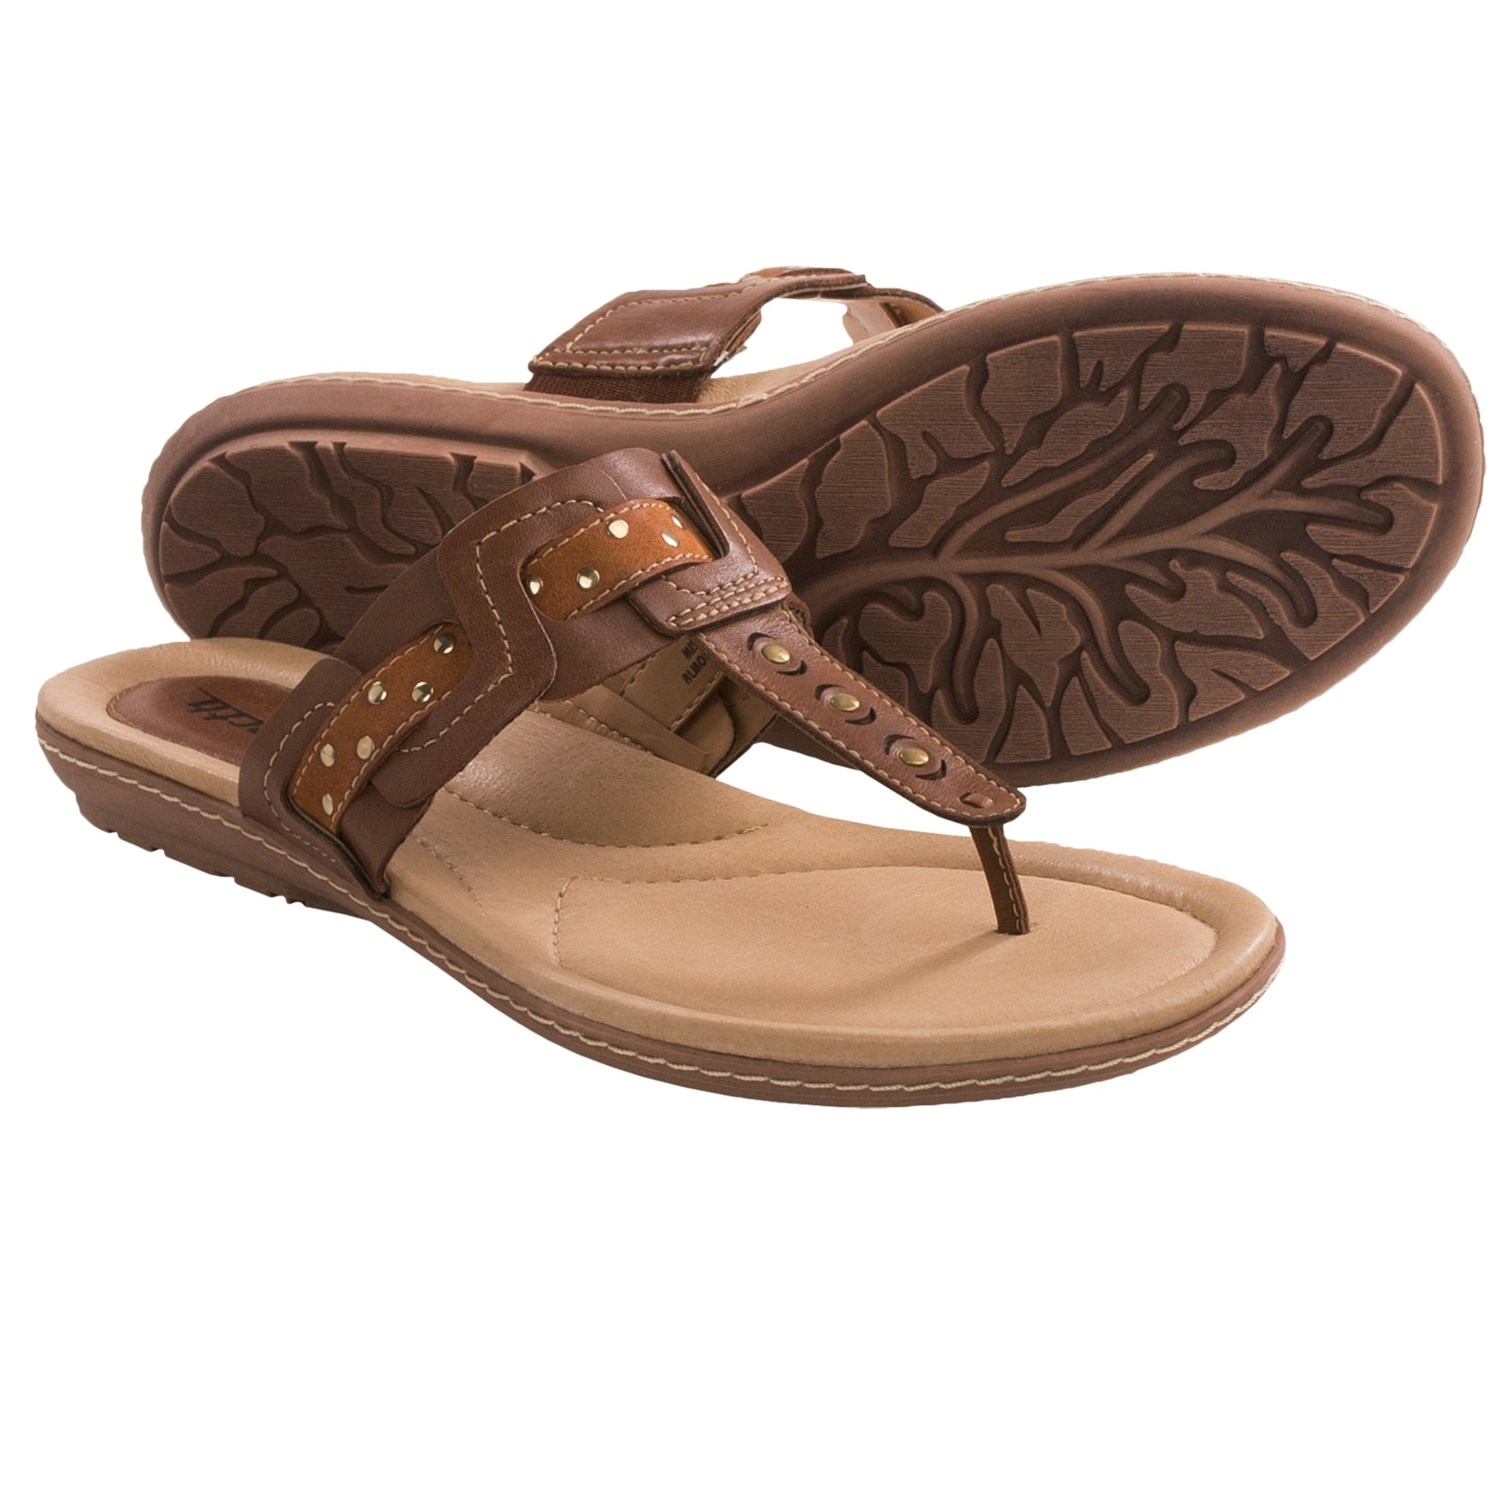 Earth Mist Thong Sandals (For Women) in Almond Calf